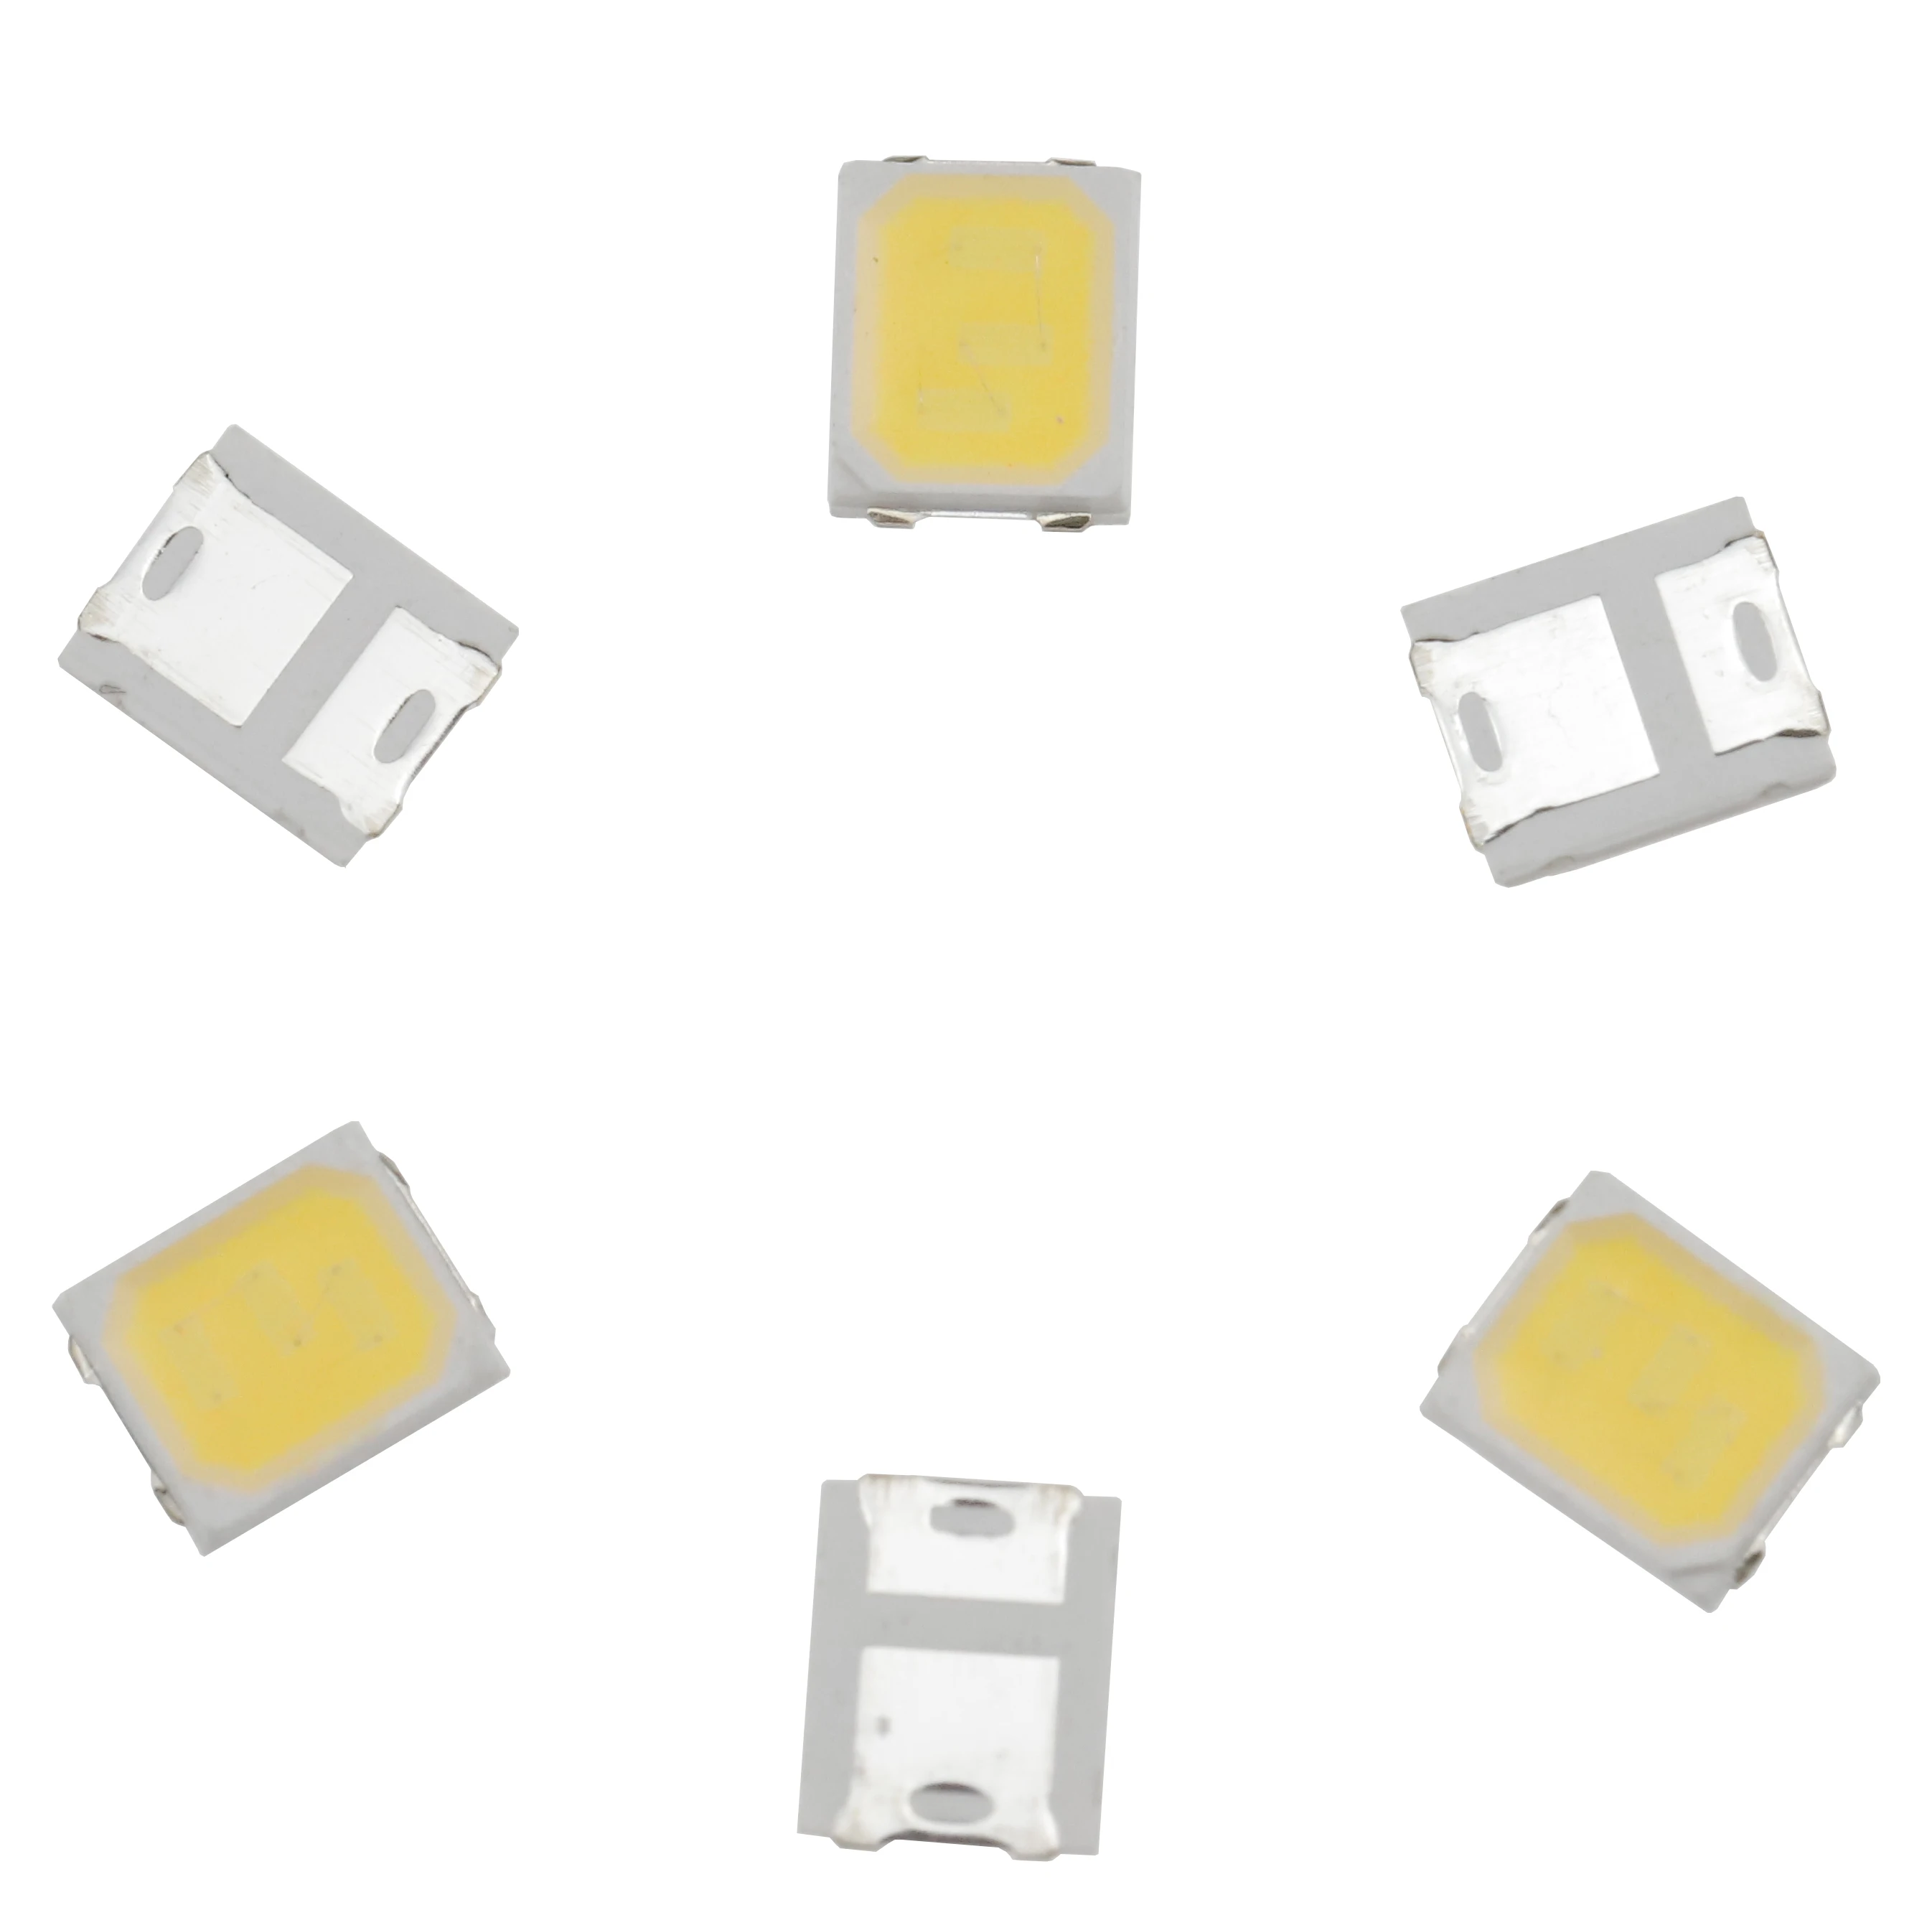 Wholesale price manufacturing  SMD LED chip 2835 0.5W 3V 70-75LM